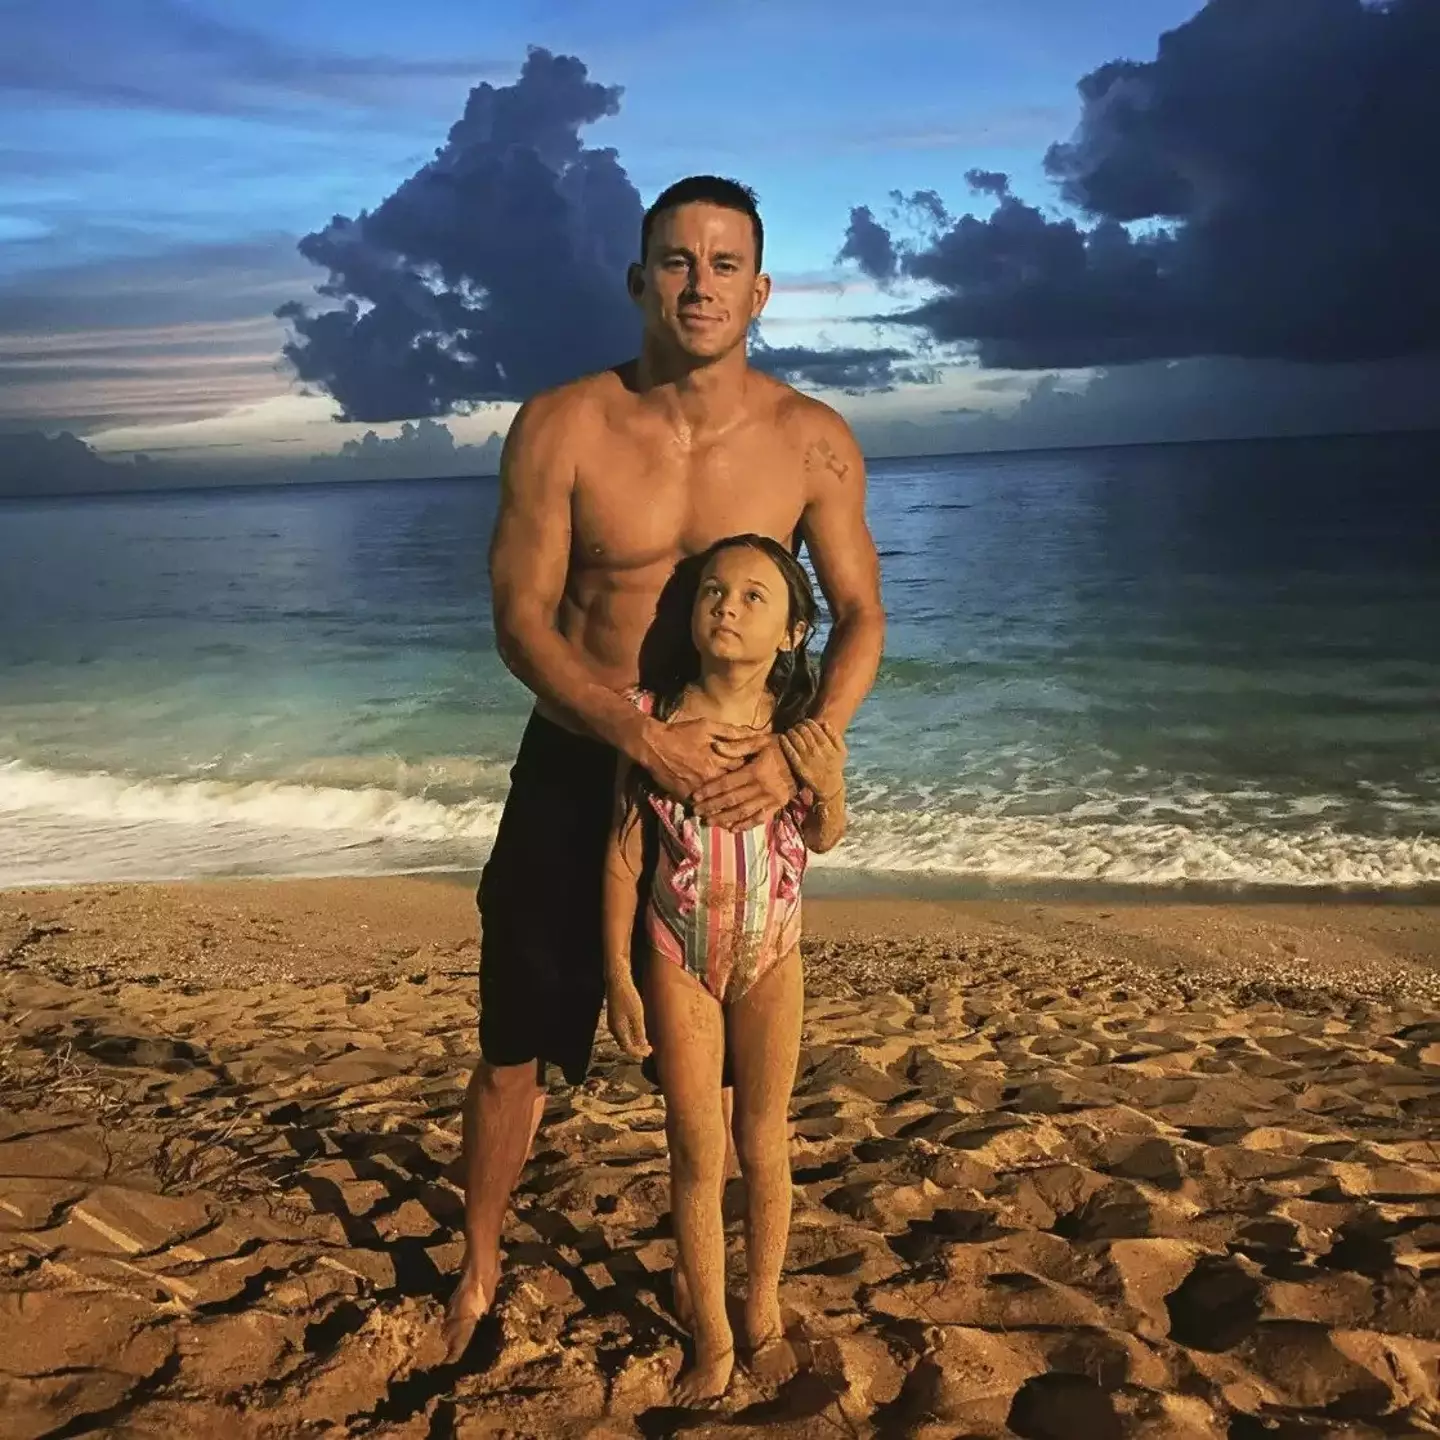 Tatum is dad to ten-year-old Everly.